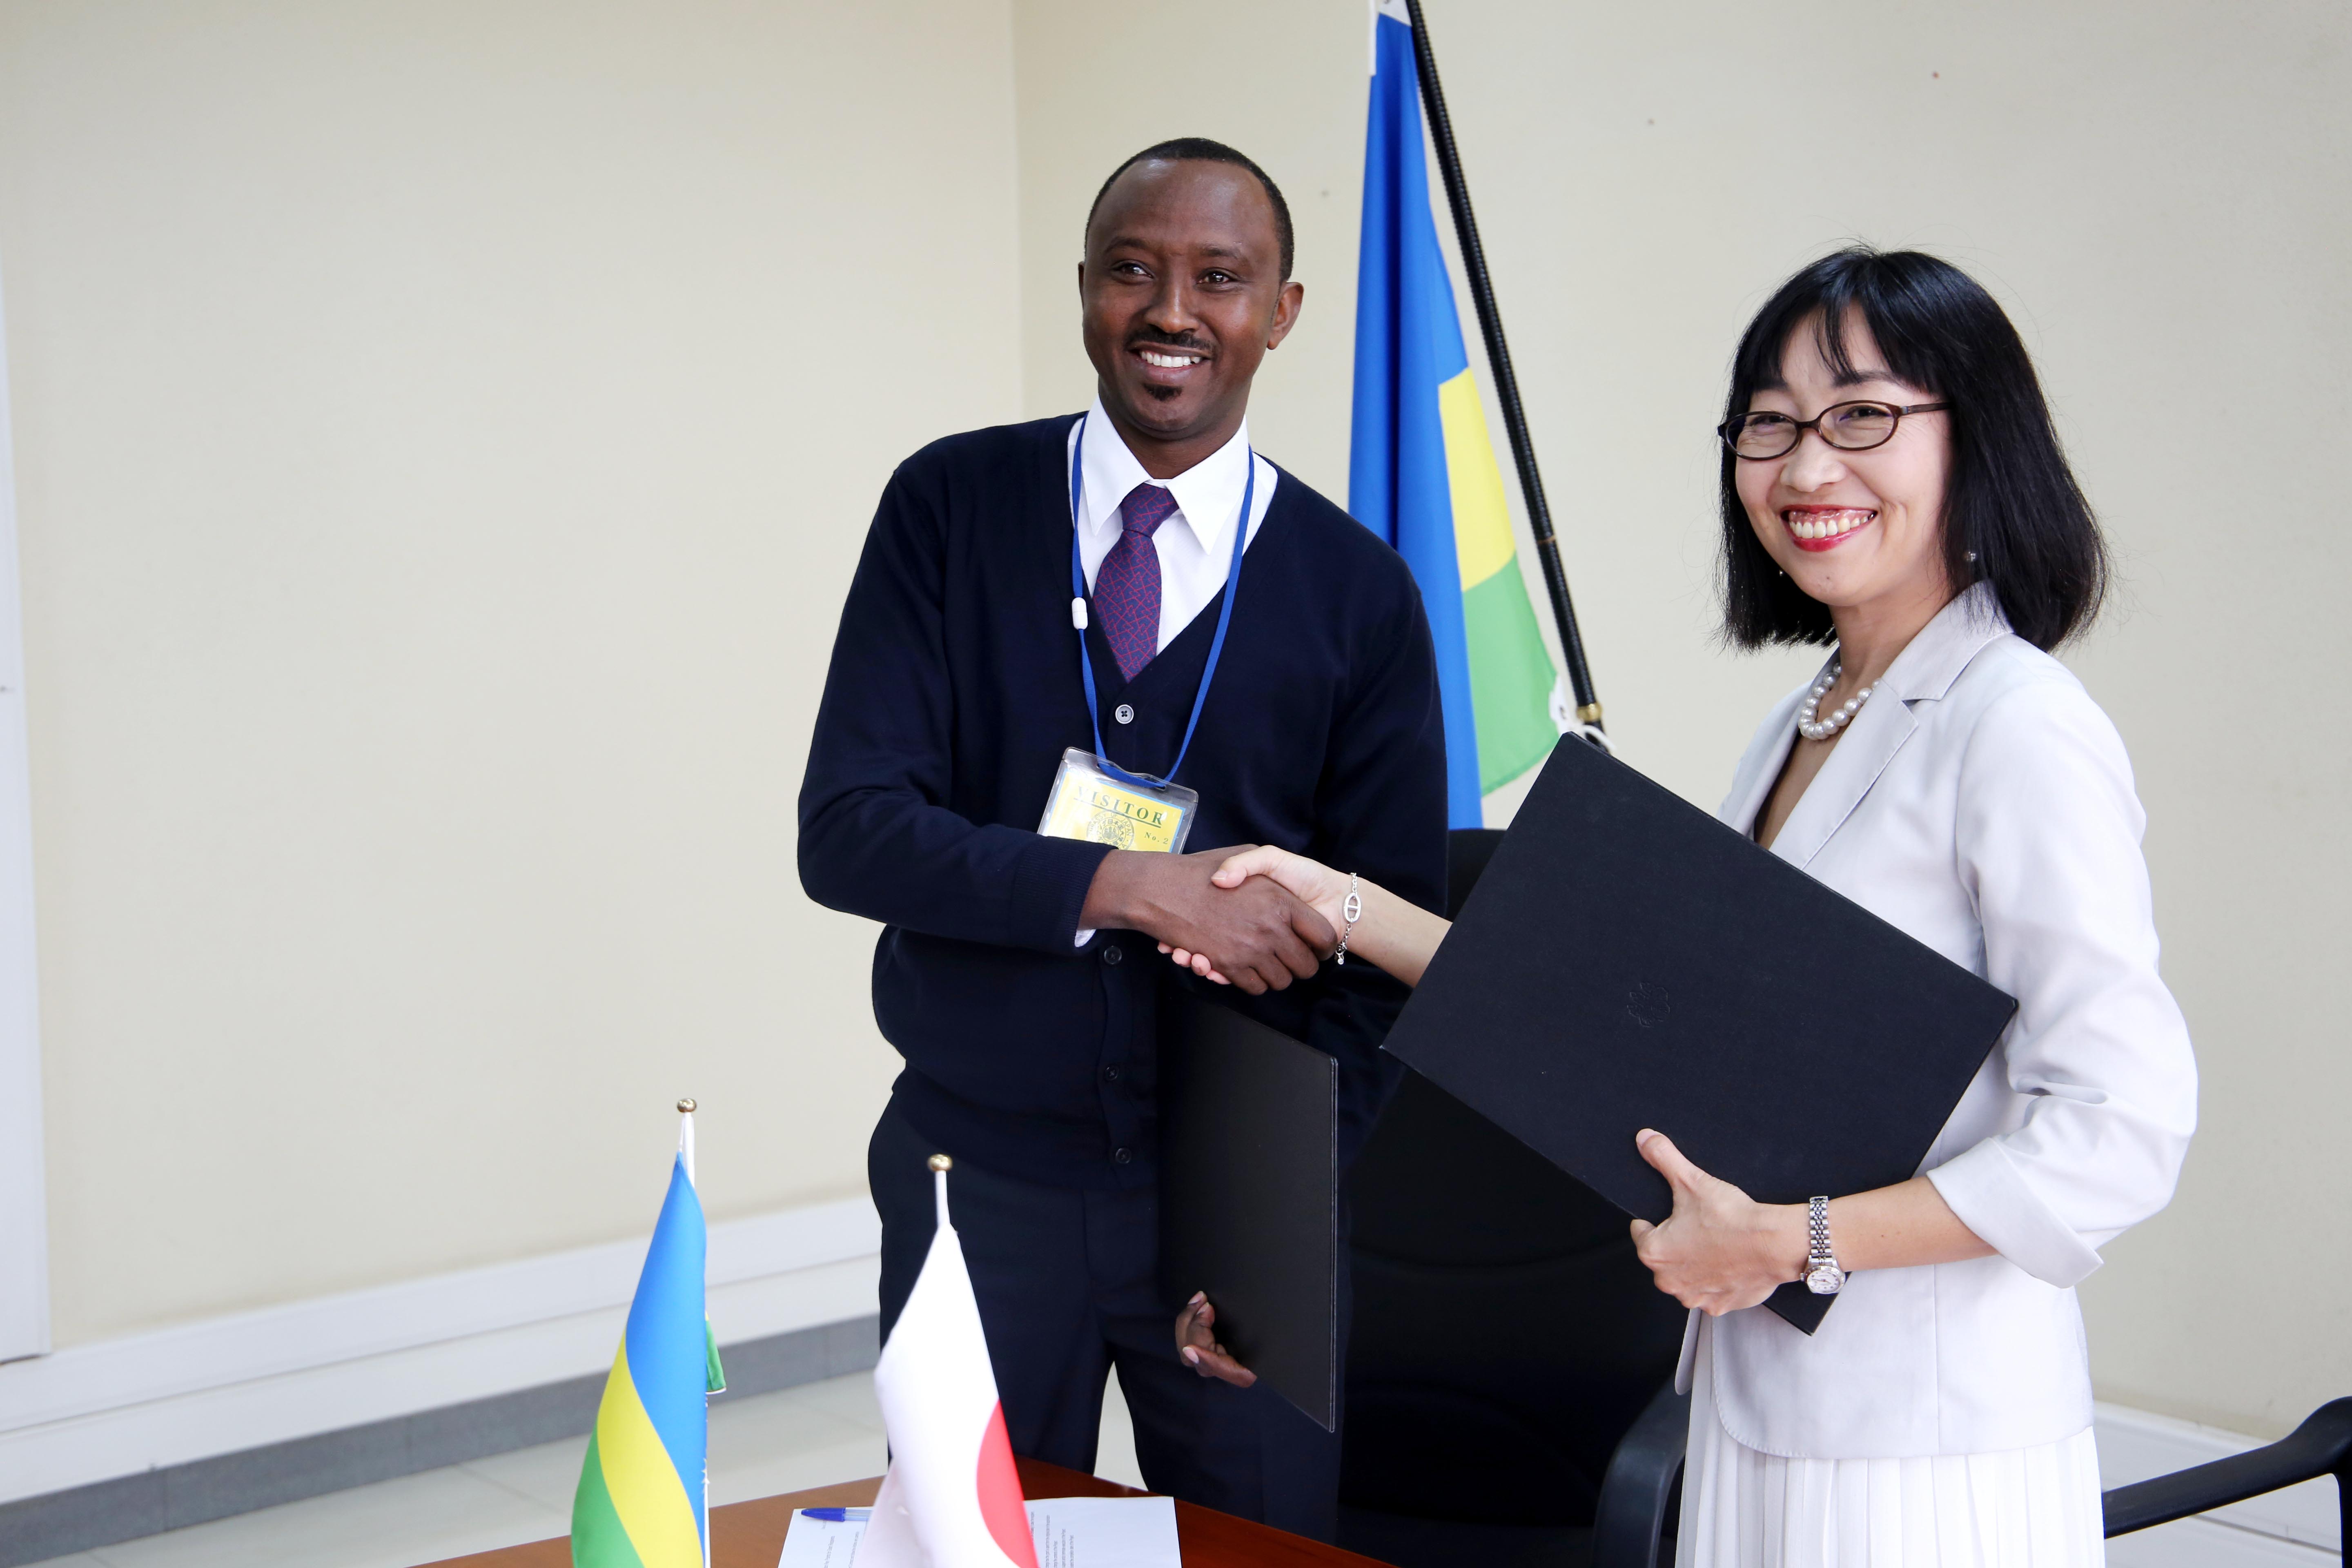 Chargu00e9 d'affaires and interim Ambassador of Japan to Rwanda,Yuko Hotta (right) and the Director General of Nyamata Hospital, Dr William Rutagengwau00a0 after signing the agreement.